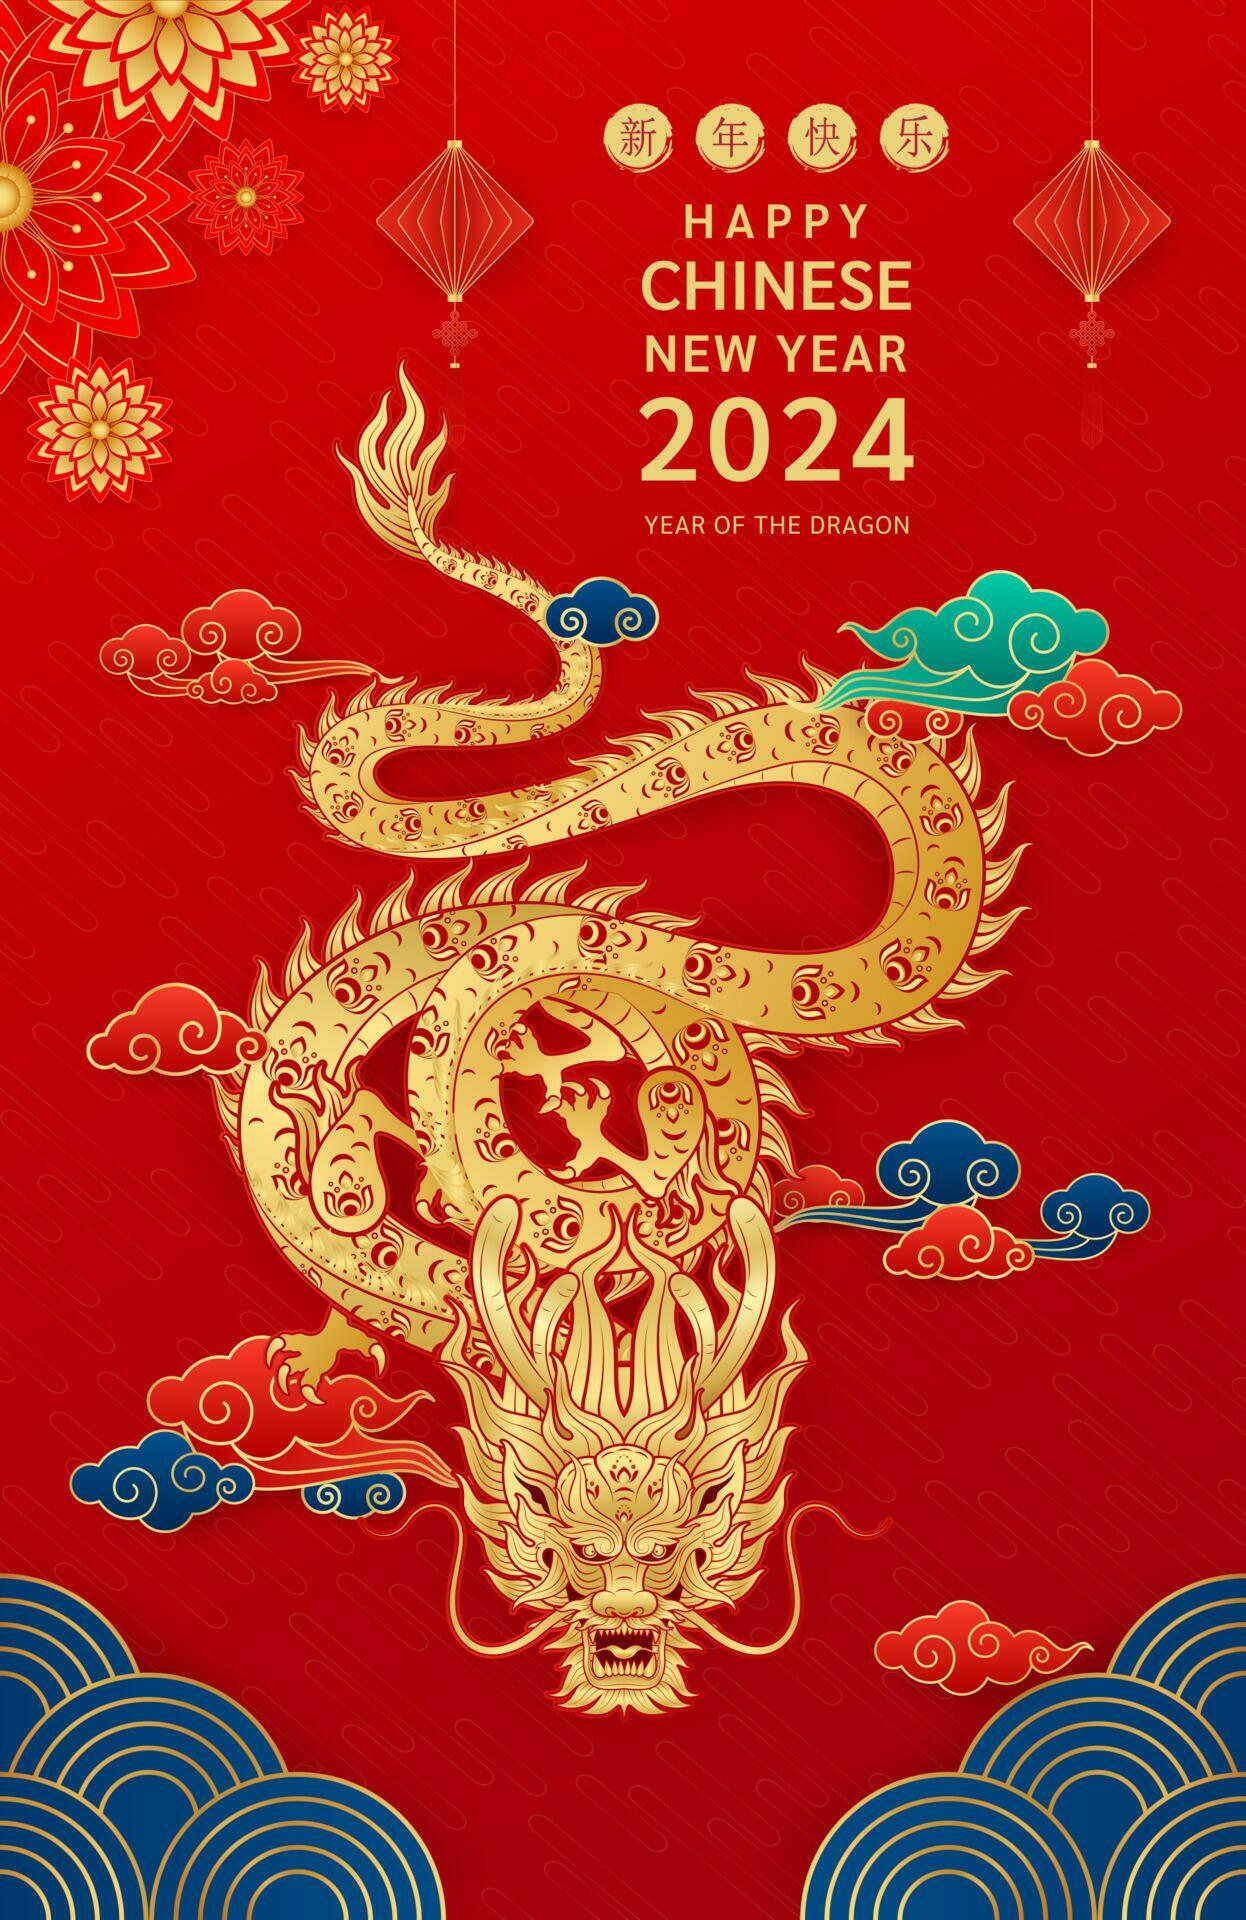 Is 2024 The Year Of A Dragon Image to u